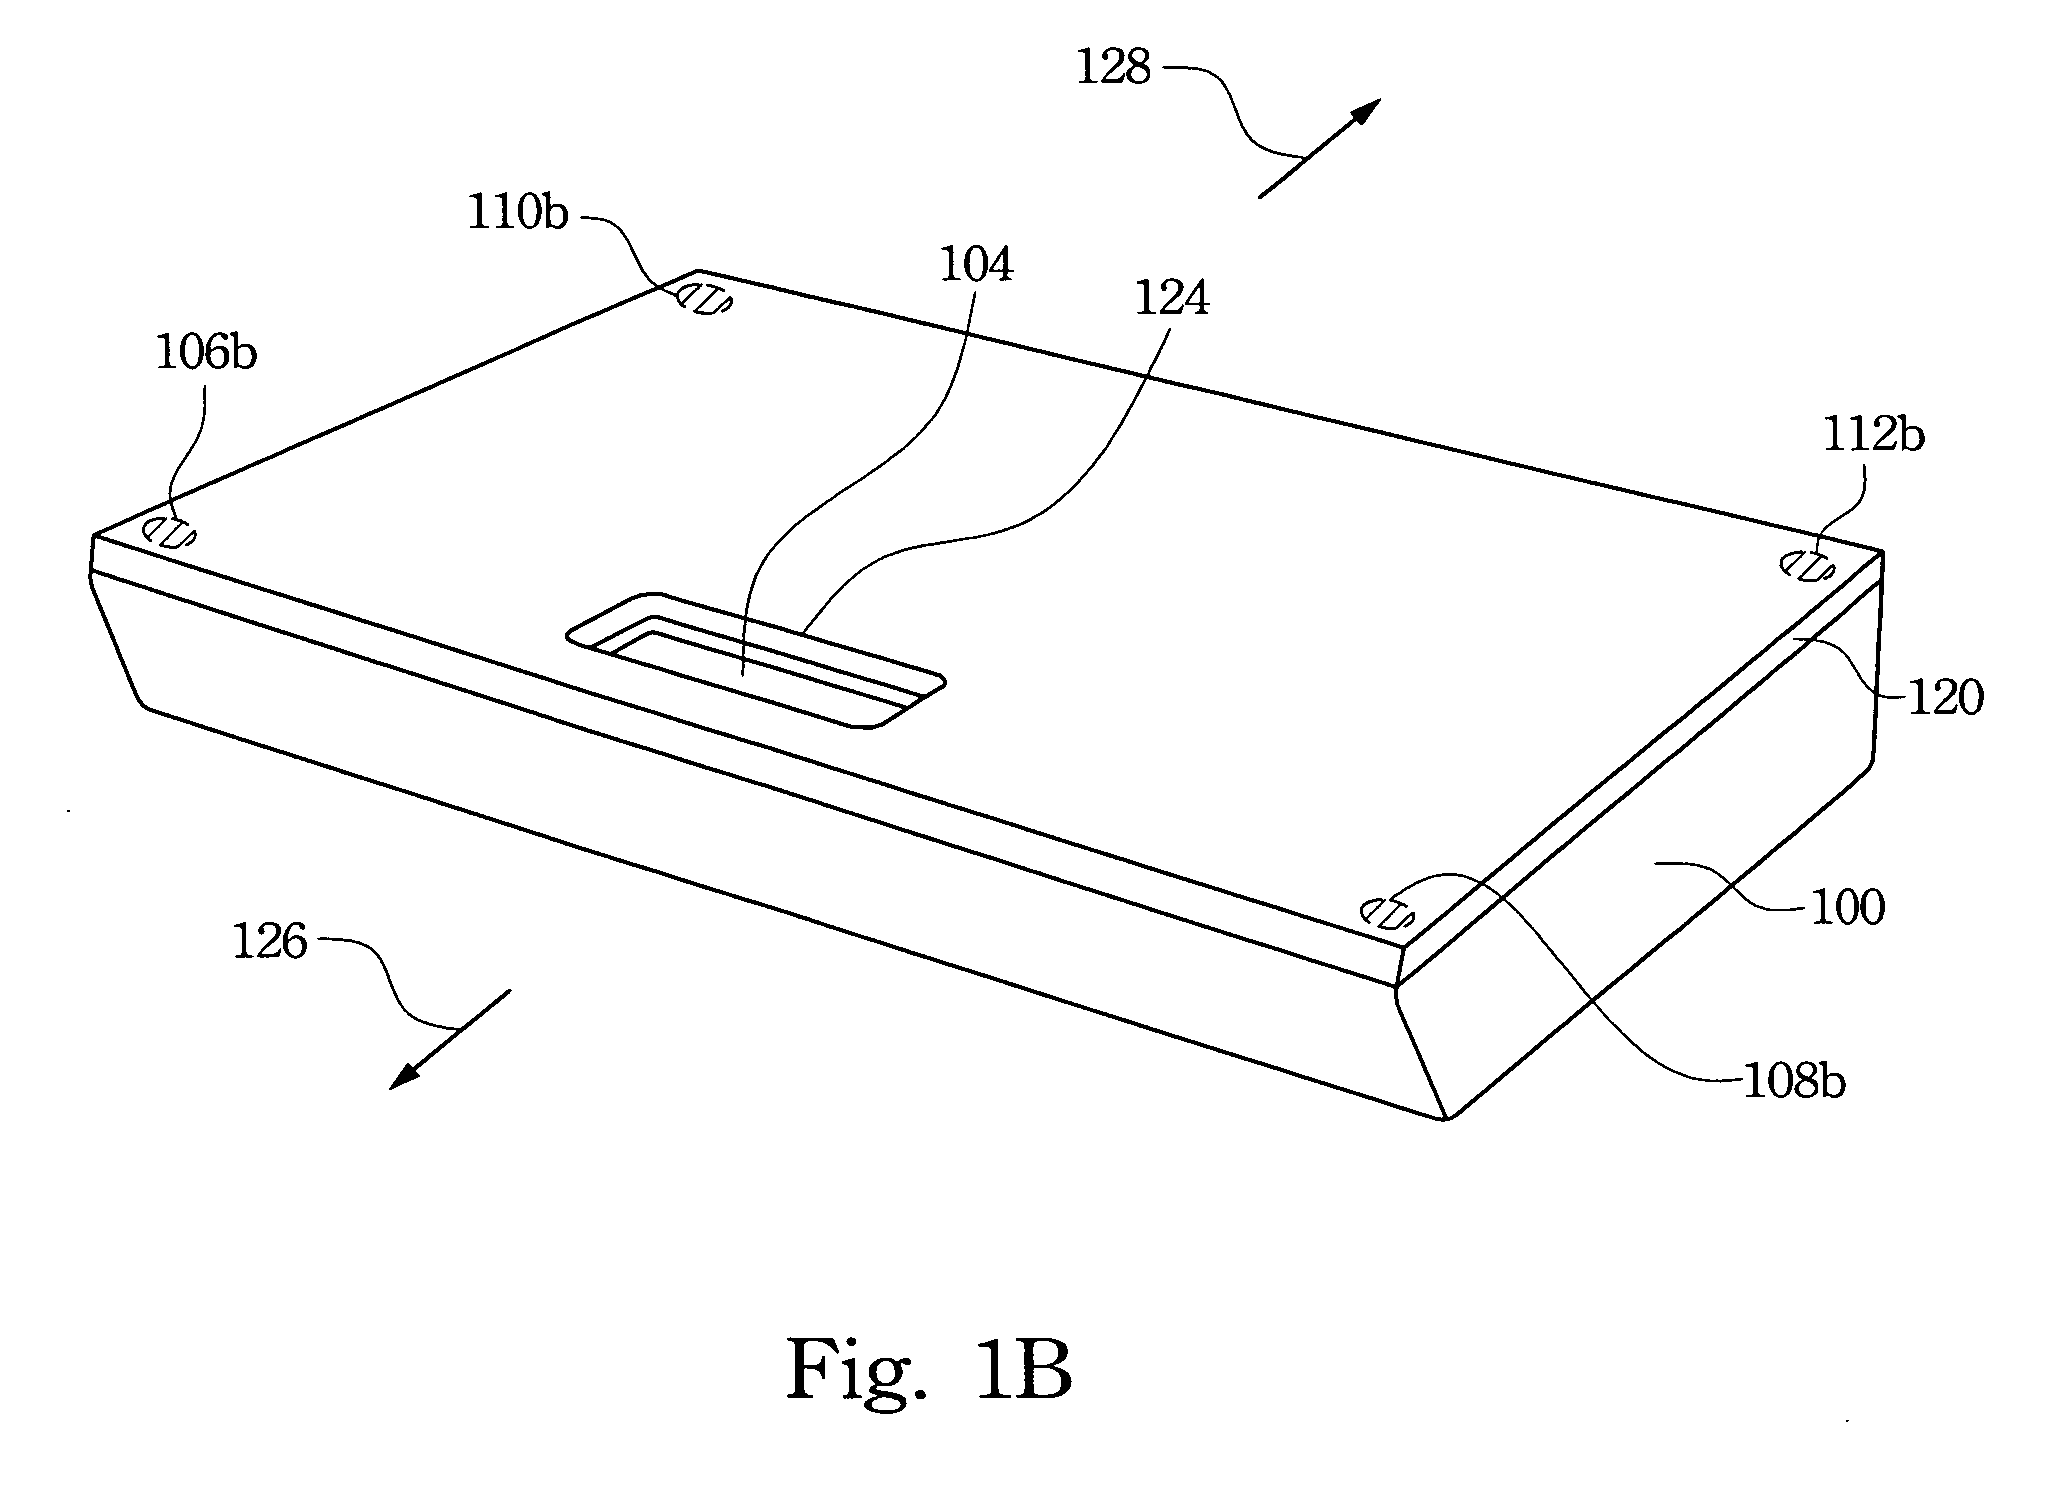 Auto-aligning and connecting structure between electronic device and accessory